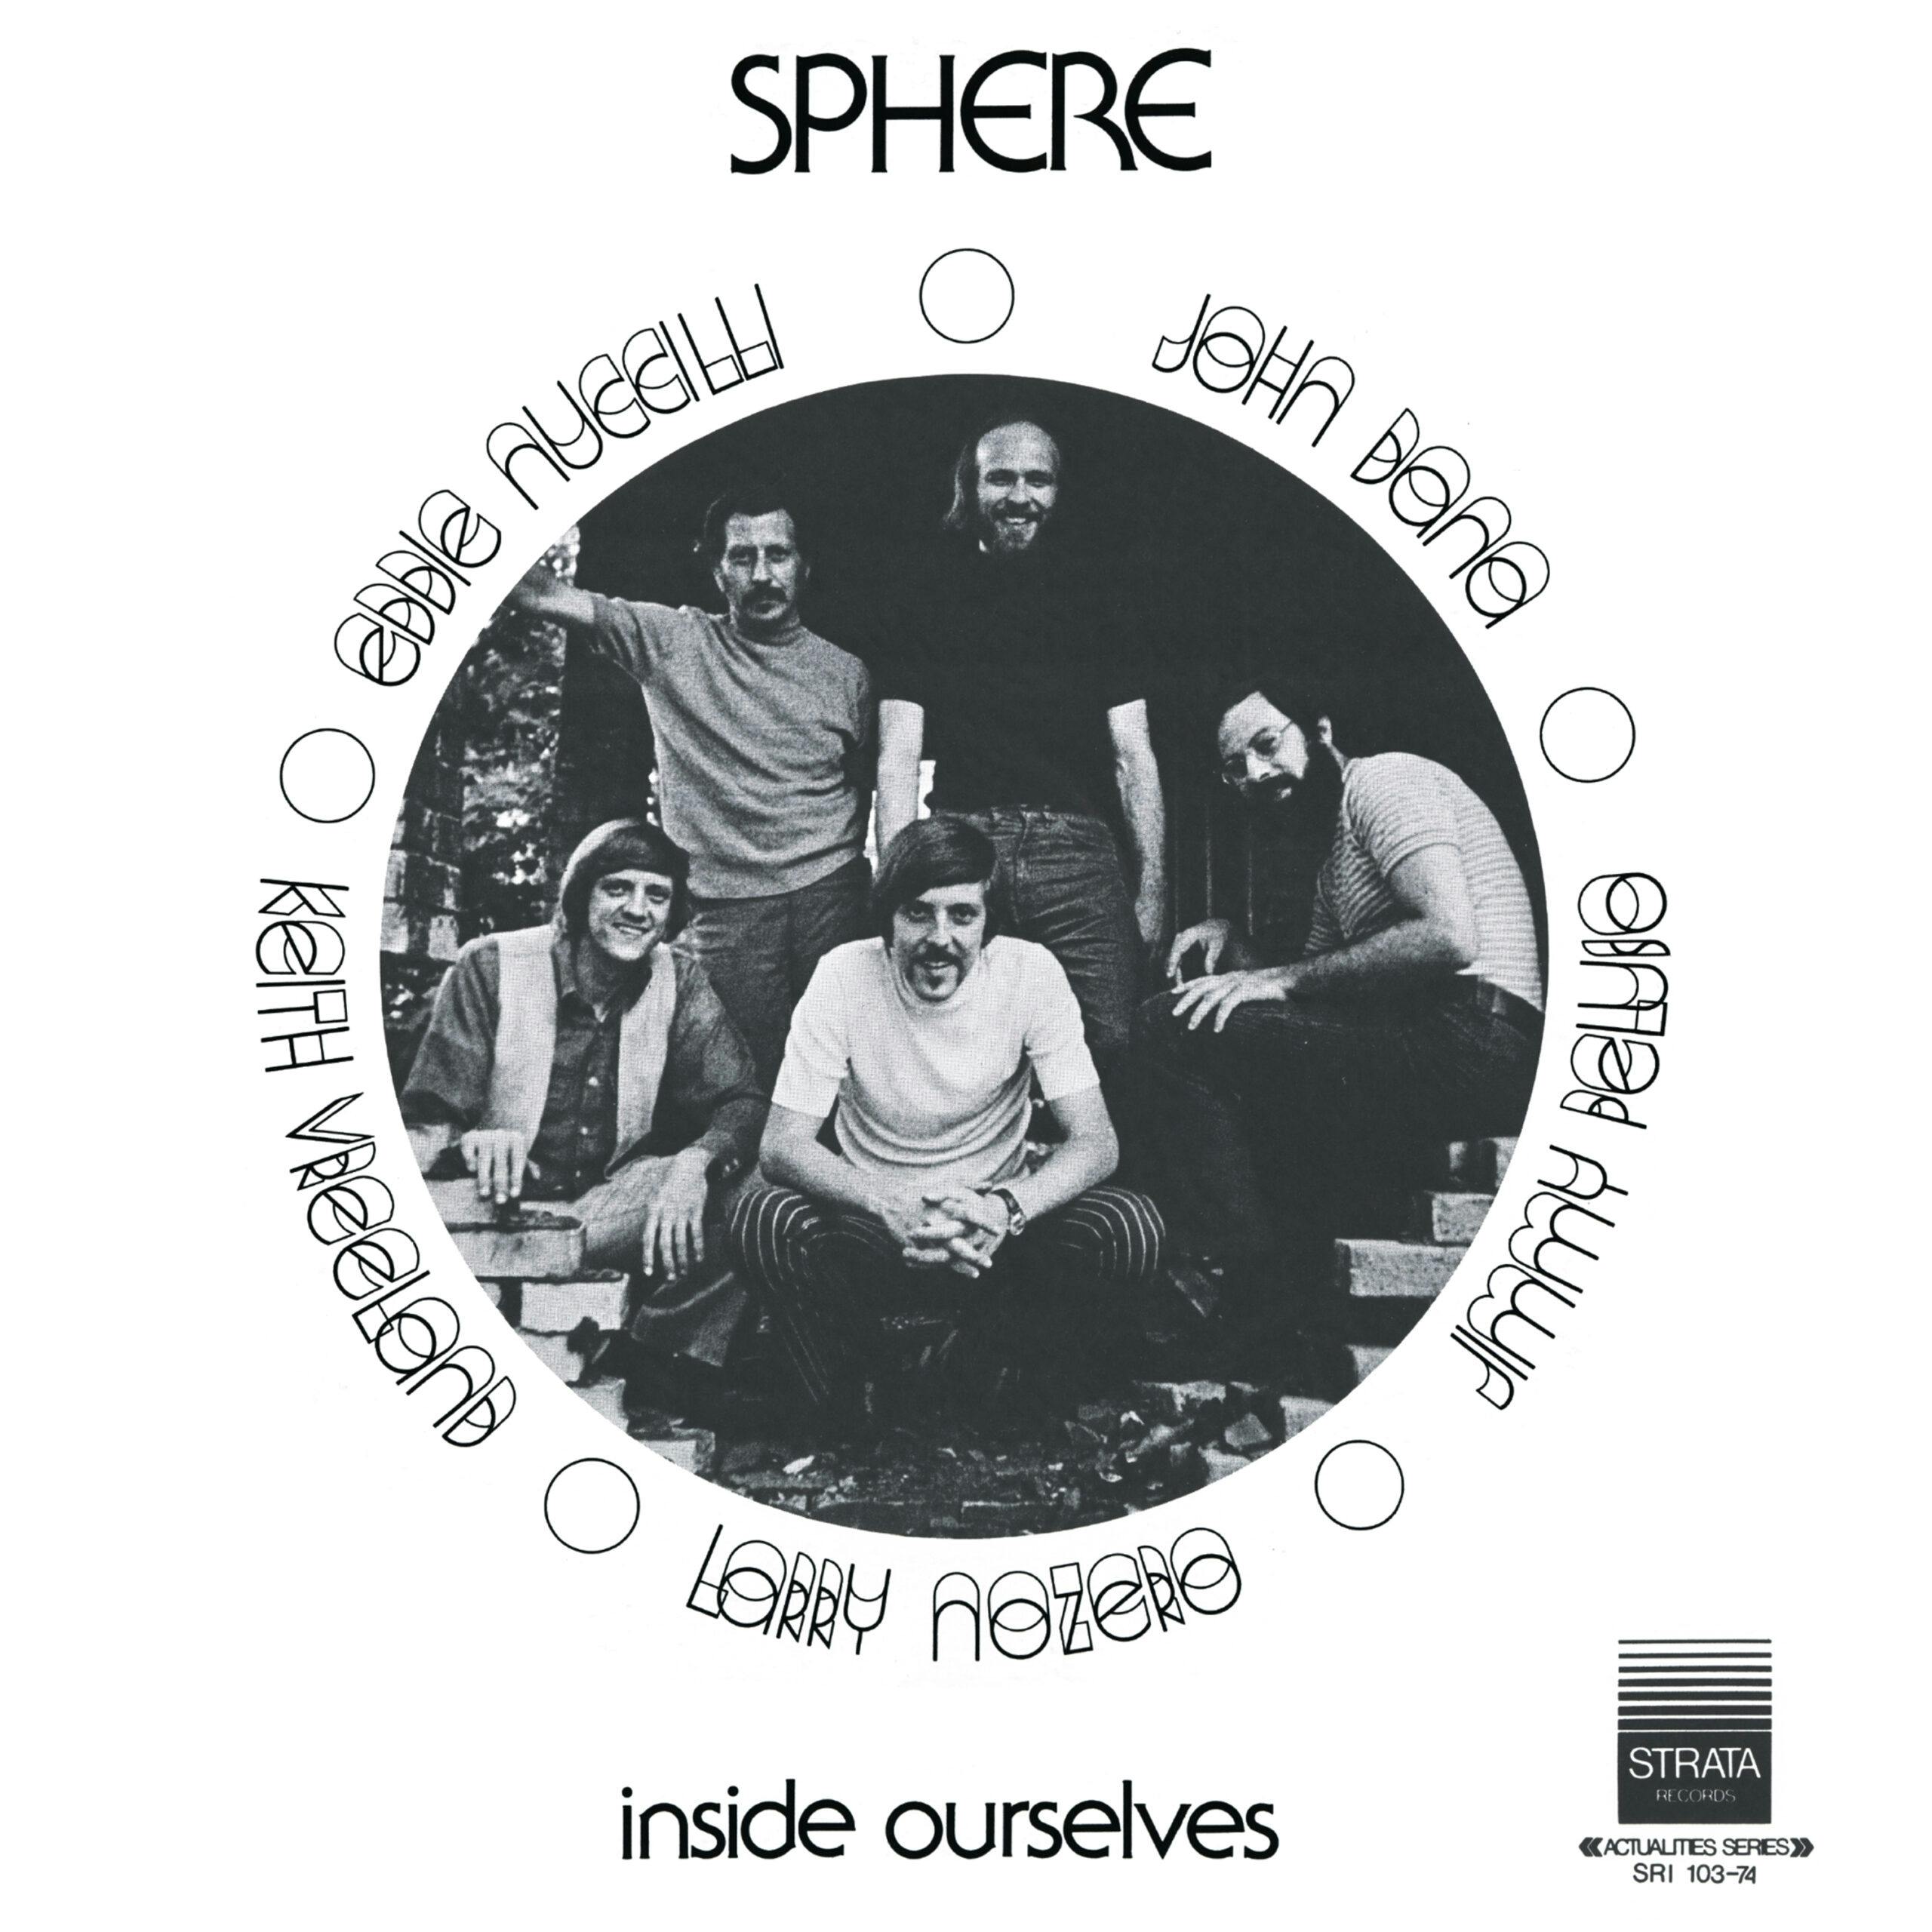 As part of its continuing exploration of Detroit’s Strata label with DJ Amir’s 180 Proof Records, BBE Music reissues the 1974 rare jazz classic ‘Inside Ourselves’ by Sphere.